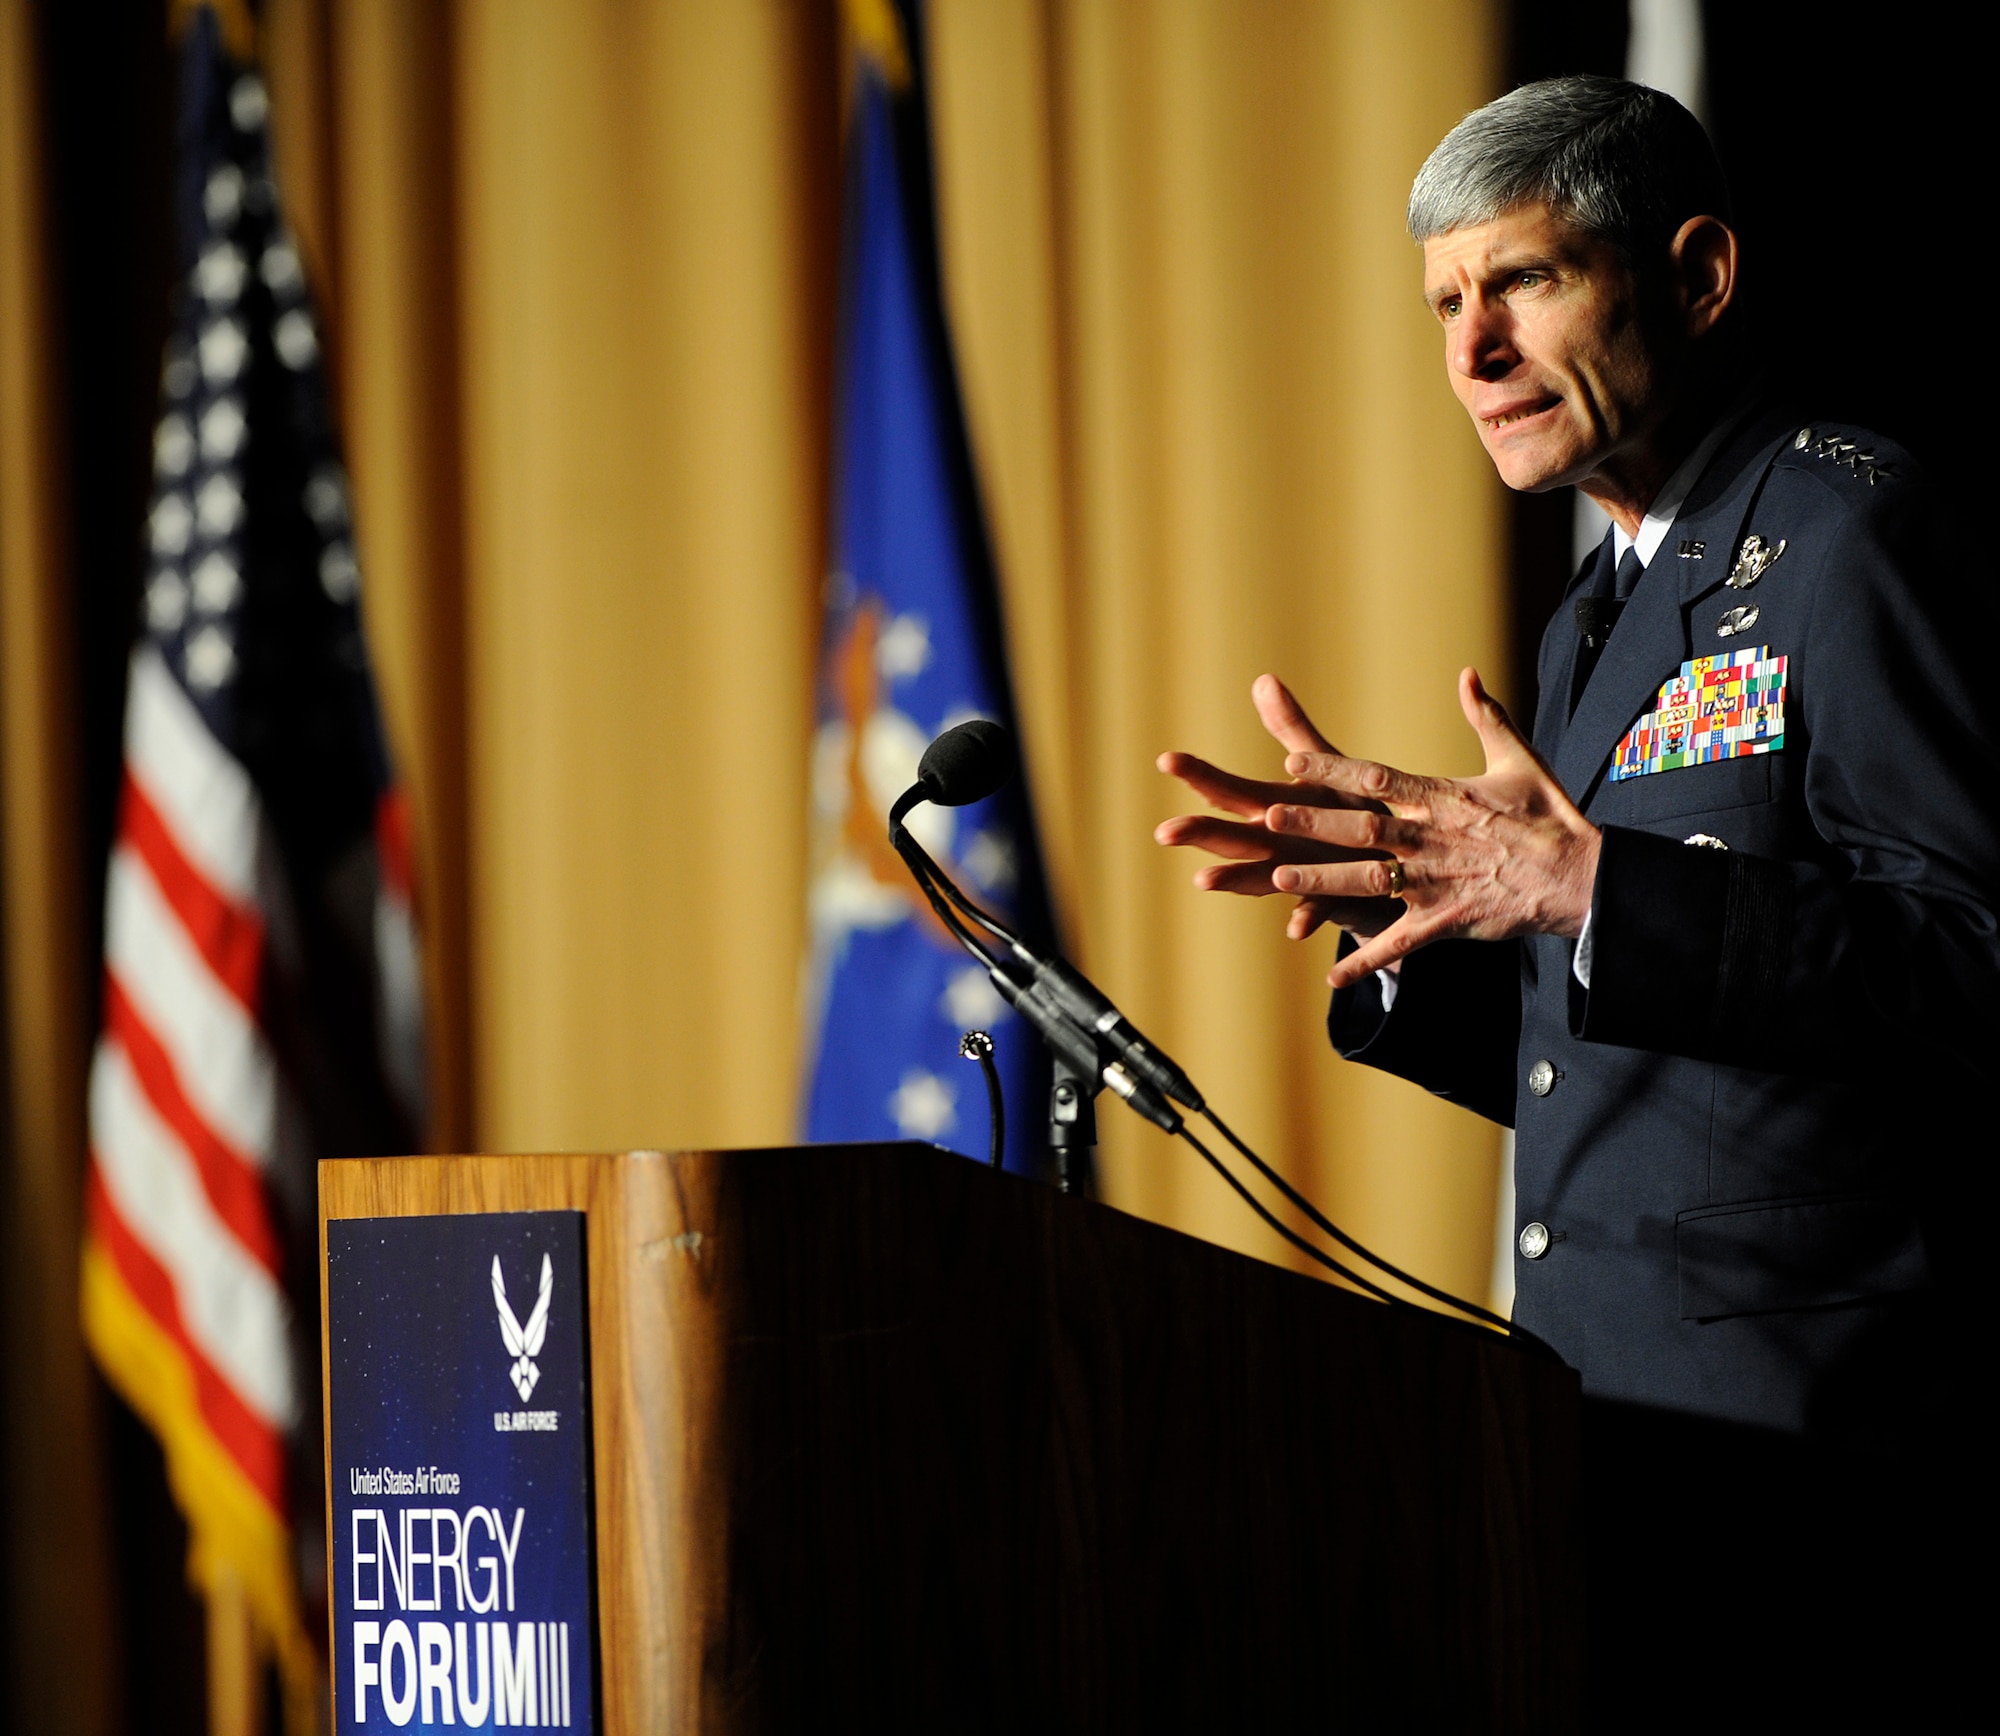 Air Force Chief of Staff Gen. Norton Schwartz talks at the U.S. Air Force Energy Forum May 28, 2010, in Washington, D.C.  General Schwartz urged the integration of energy efficiency and conservation into all aspects of the service's mission.  (U.S. Air Force photo/Scott M. Ash)   